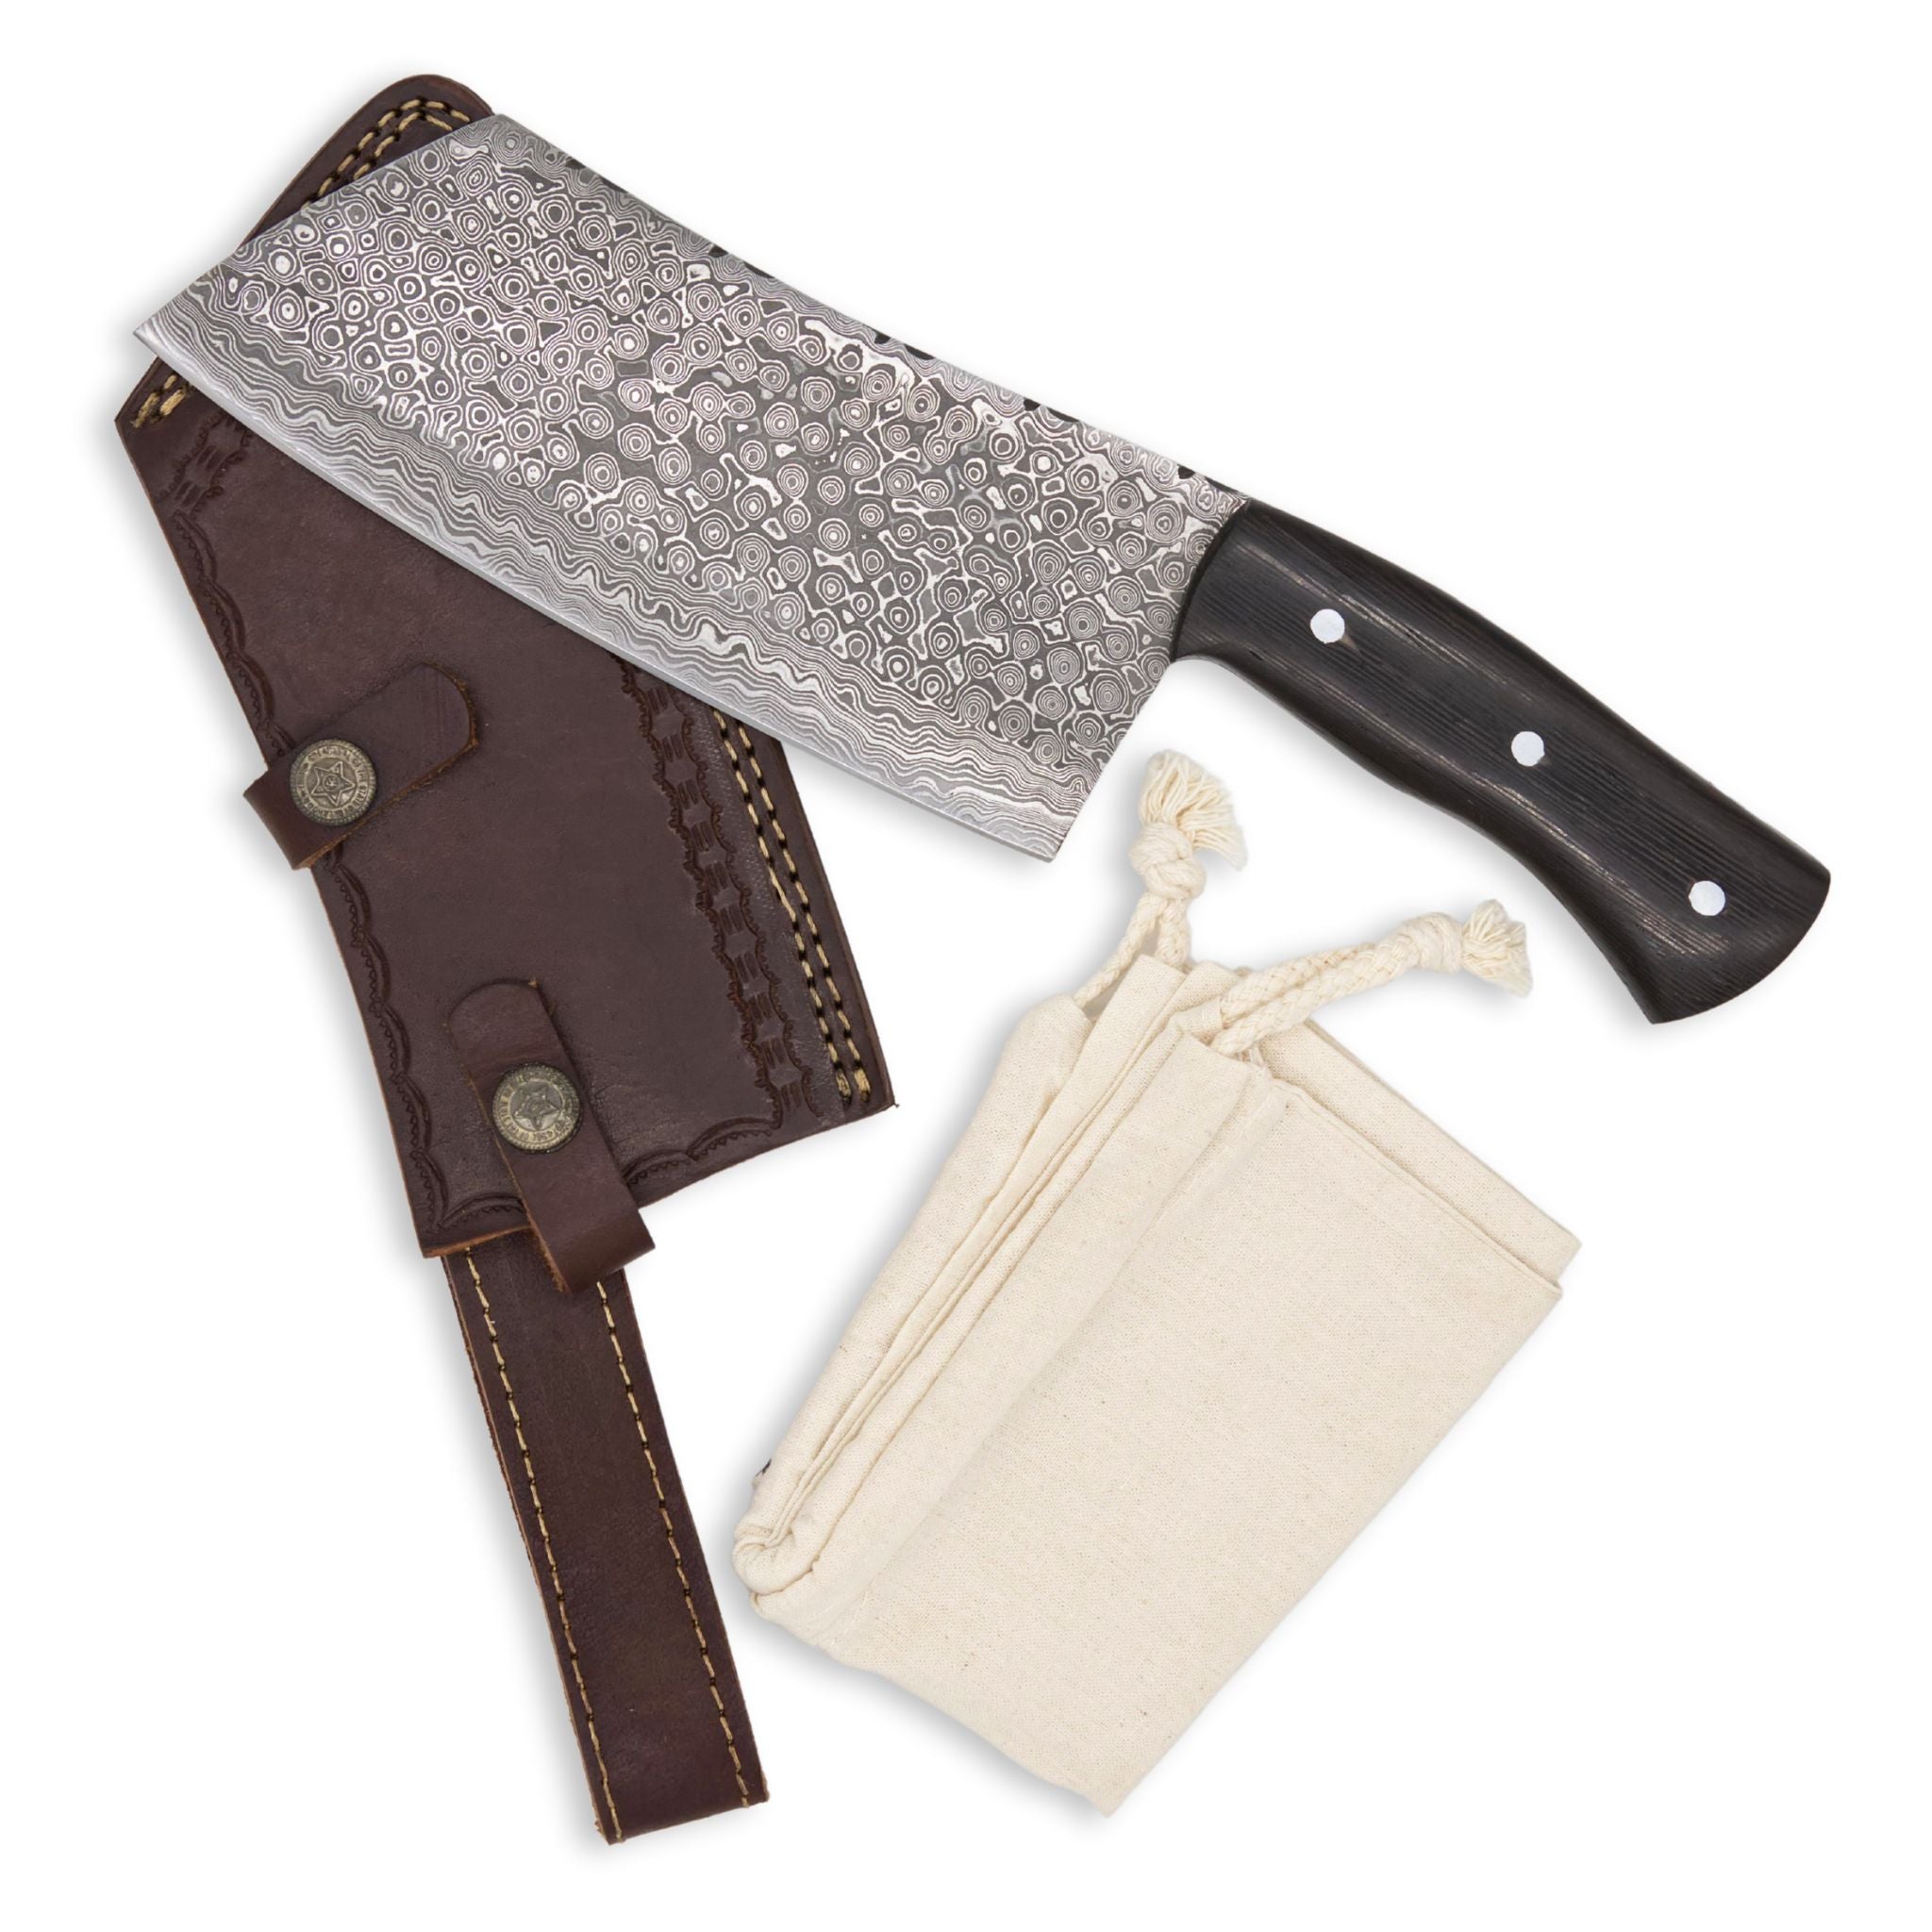 Max Mettle I Handmade Chef's Meat Cleaver Knife Full Tang Damascus Steel Blade Wenge Wood Handle